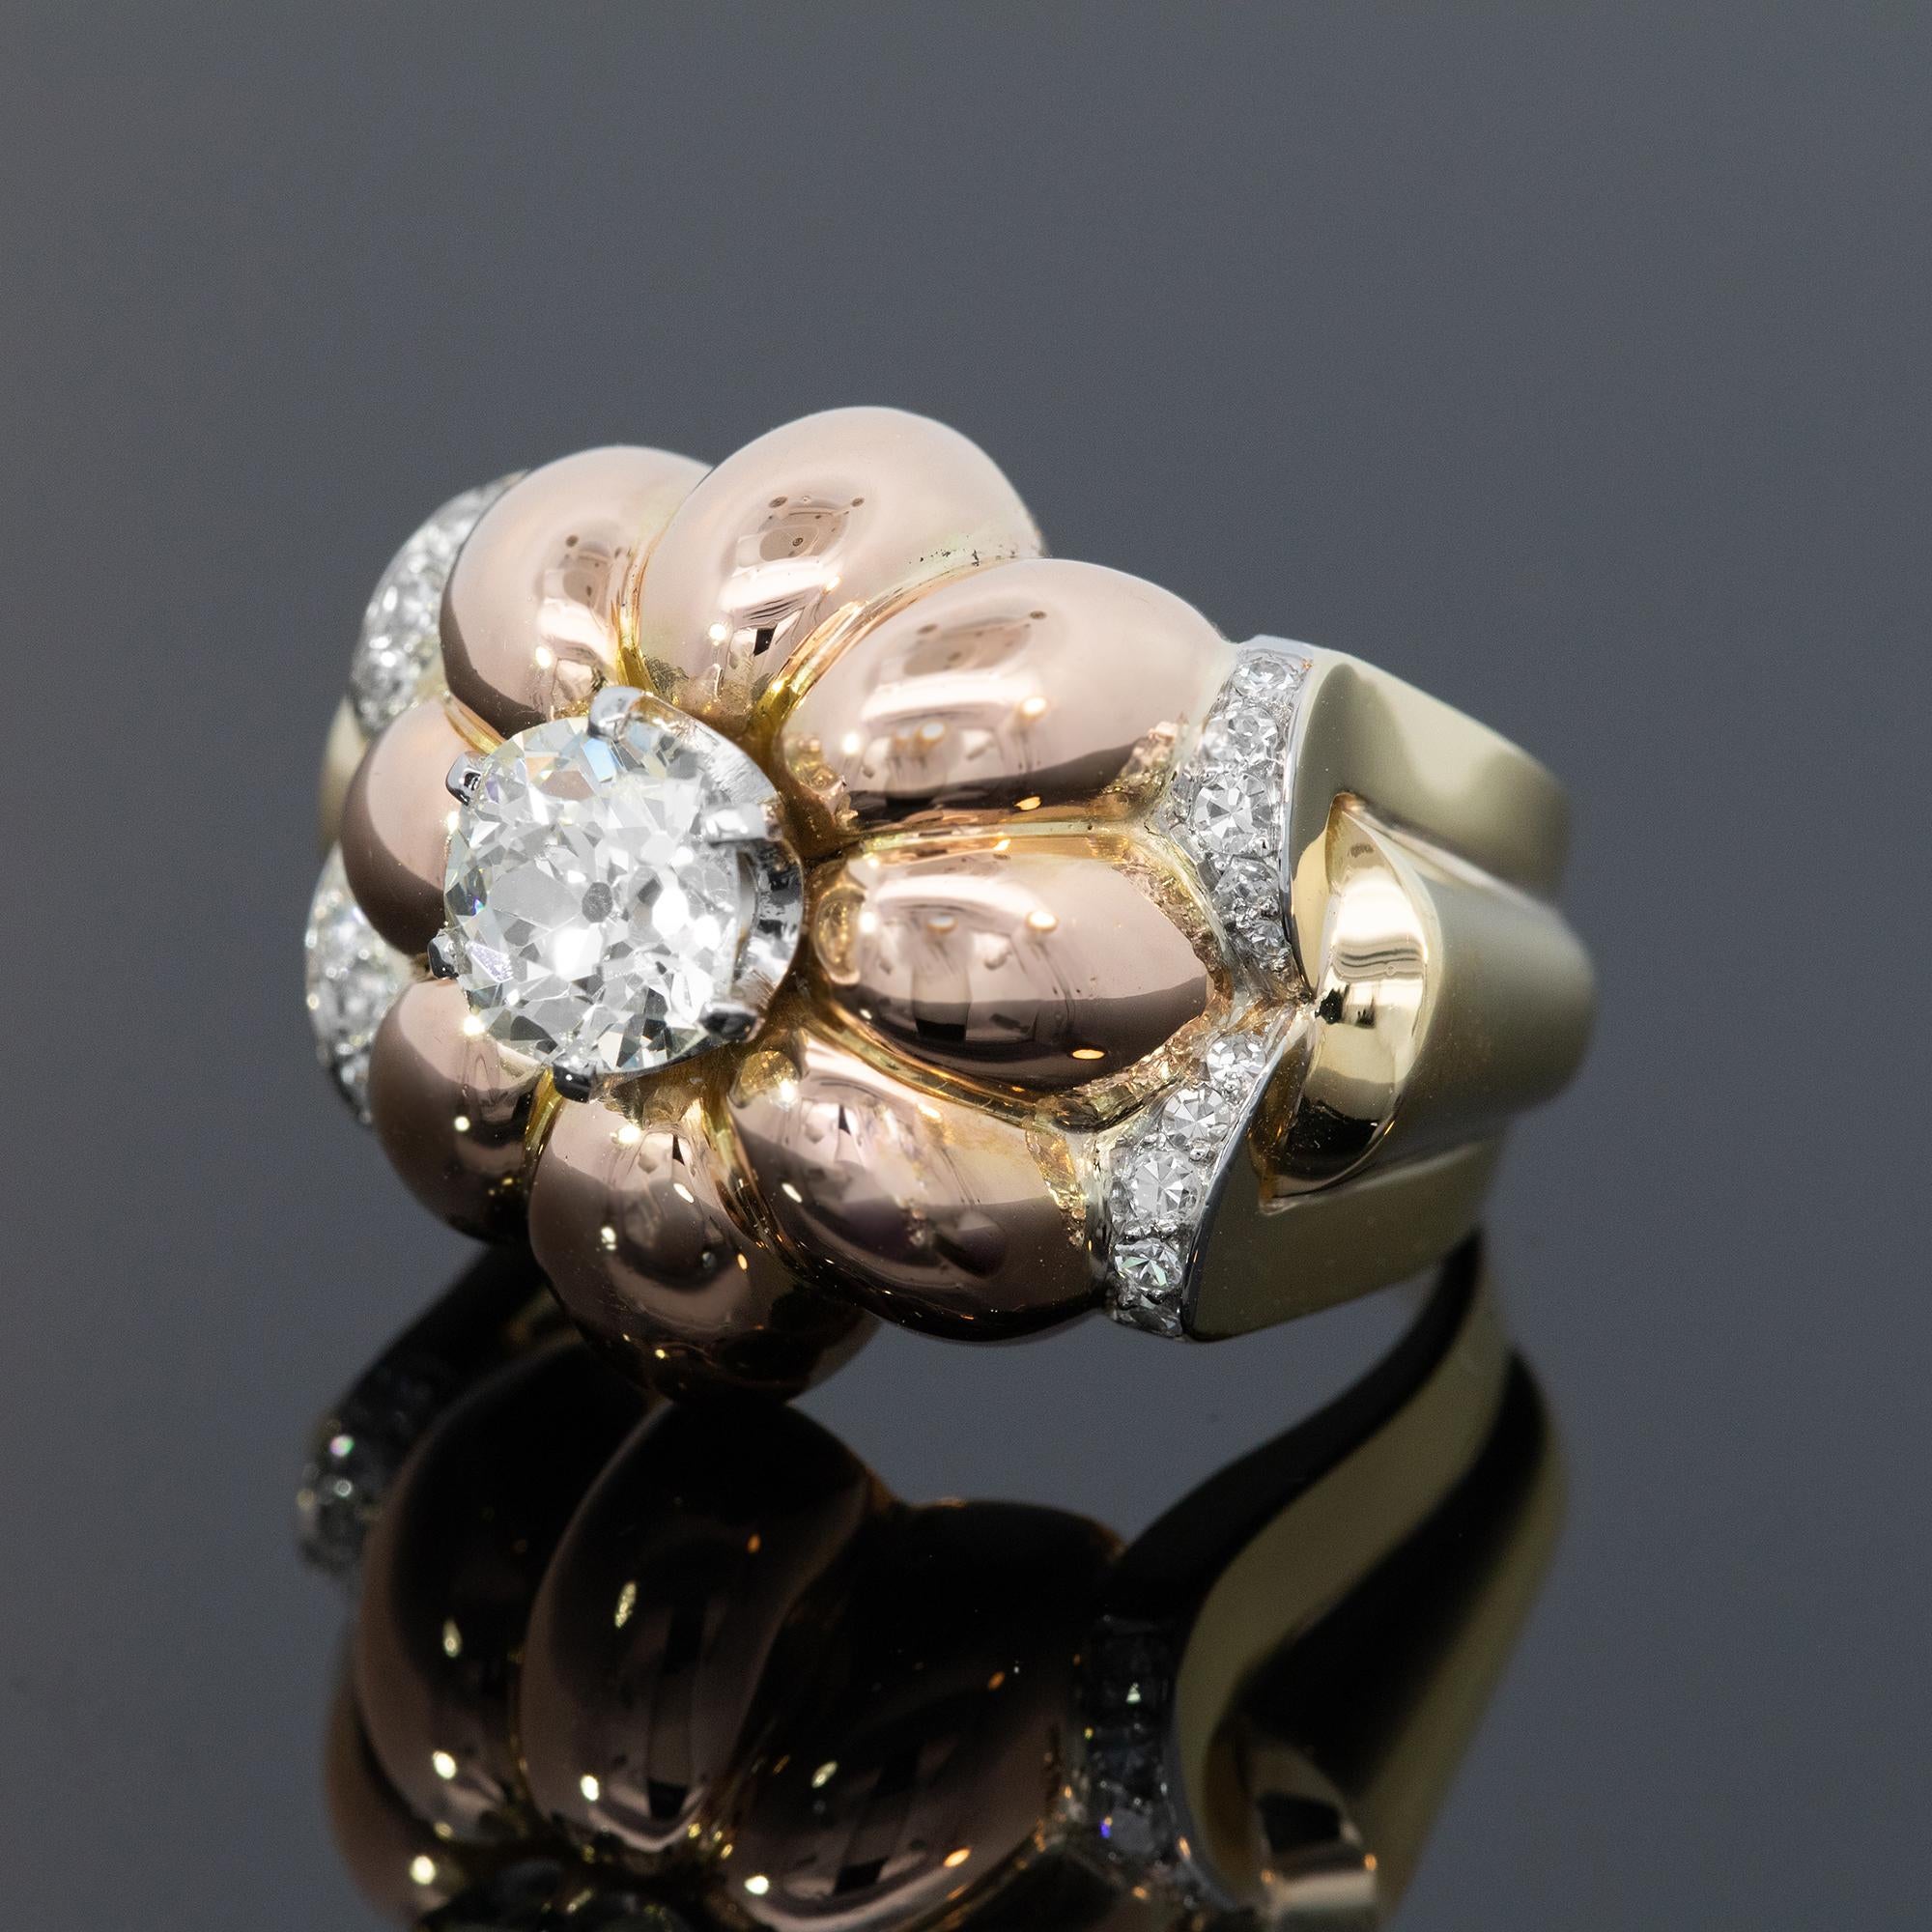 Retro French Made Diamond Flower Ring Circa 1940s For Sale 1